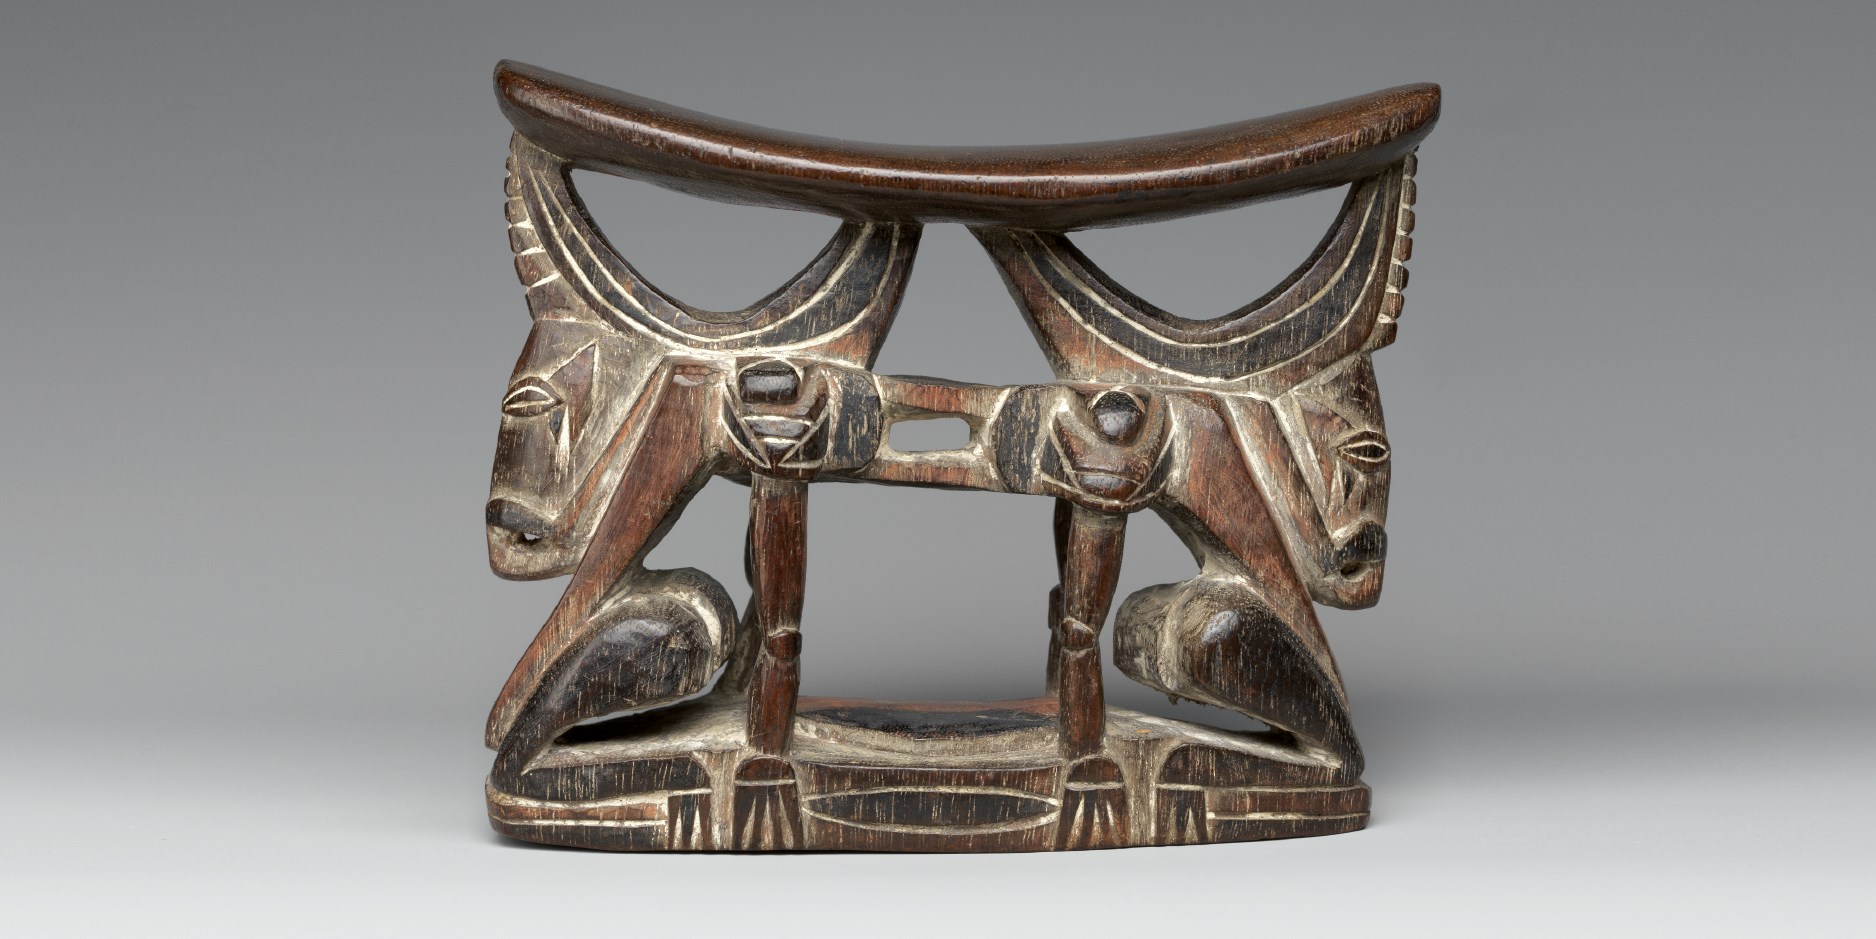 The Shape of Time: Art and Ancestors of Oceania from The Metropolitan Museum of Art